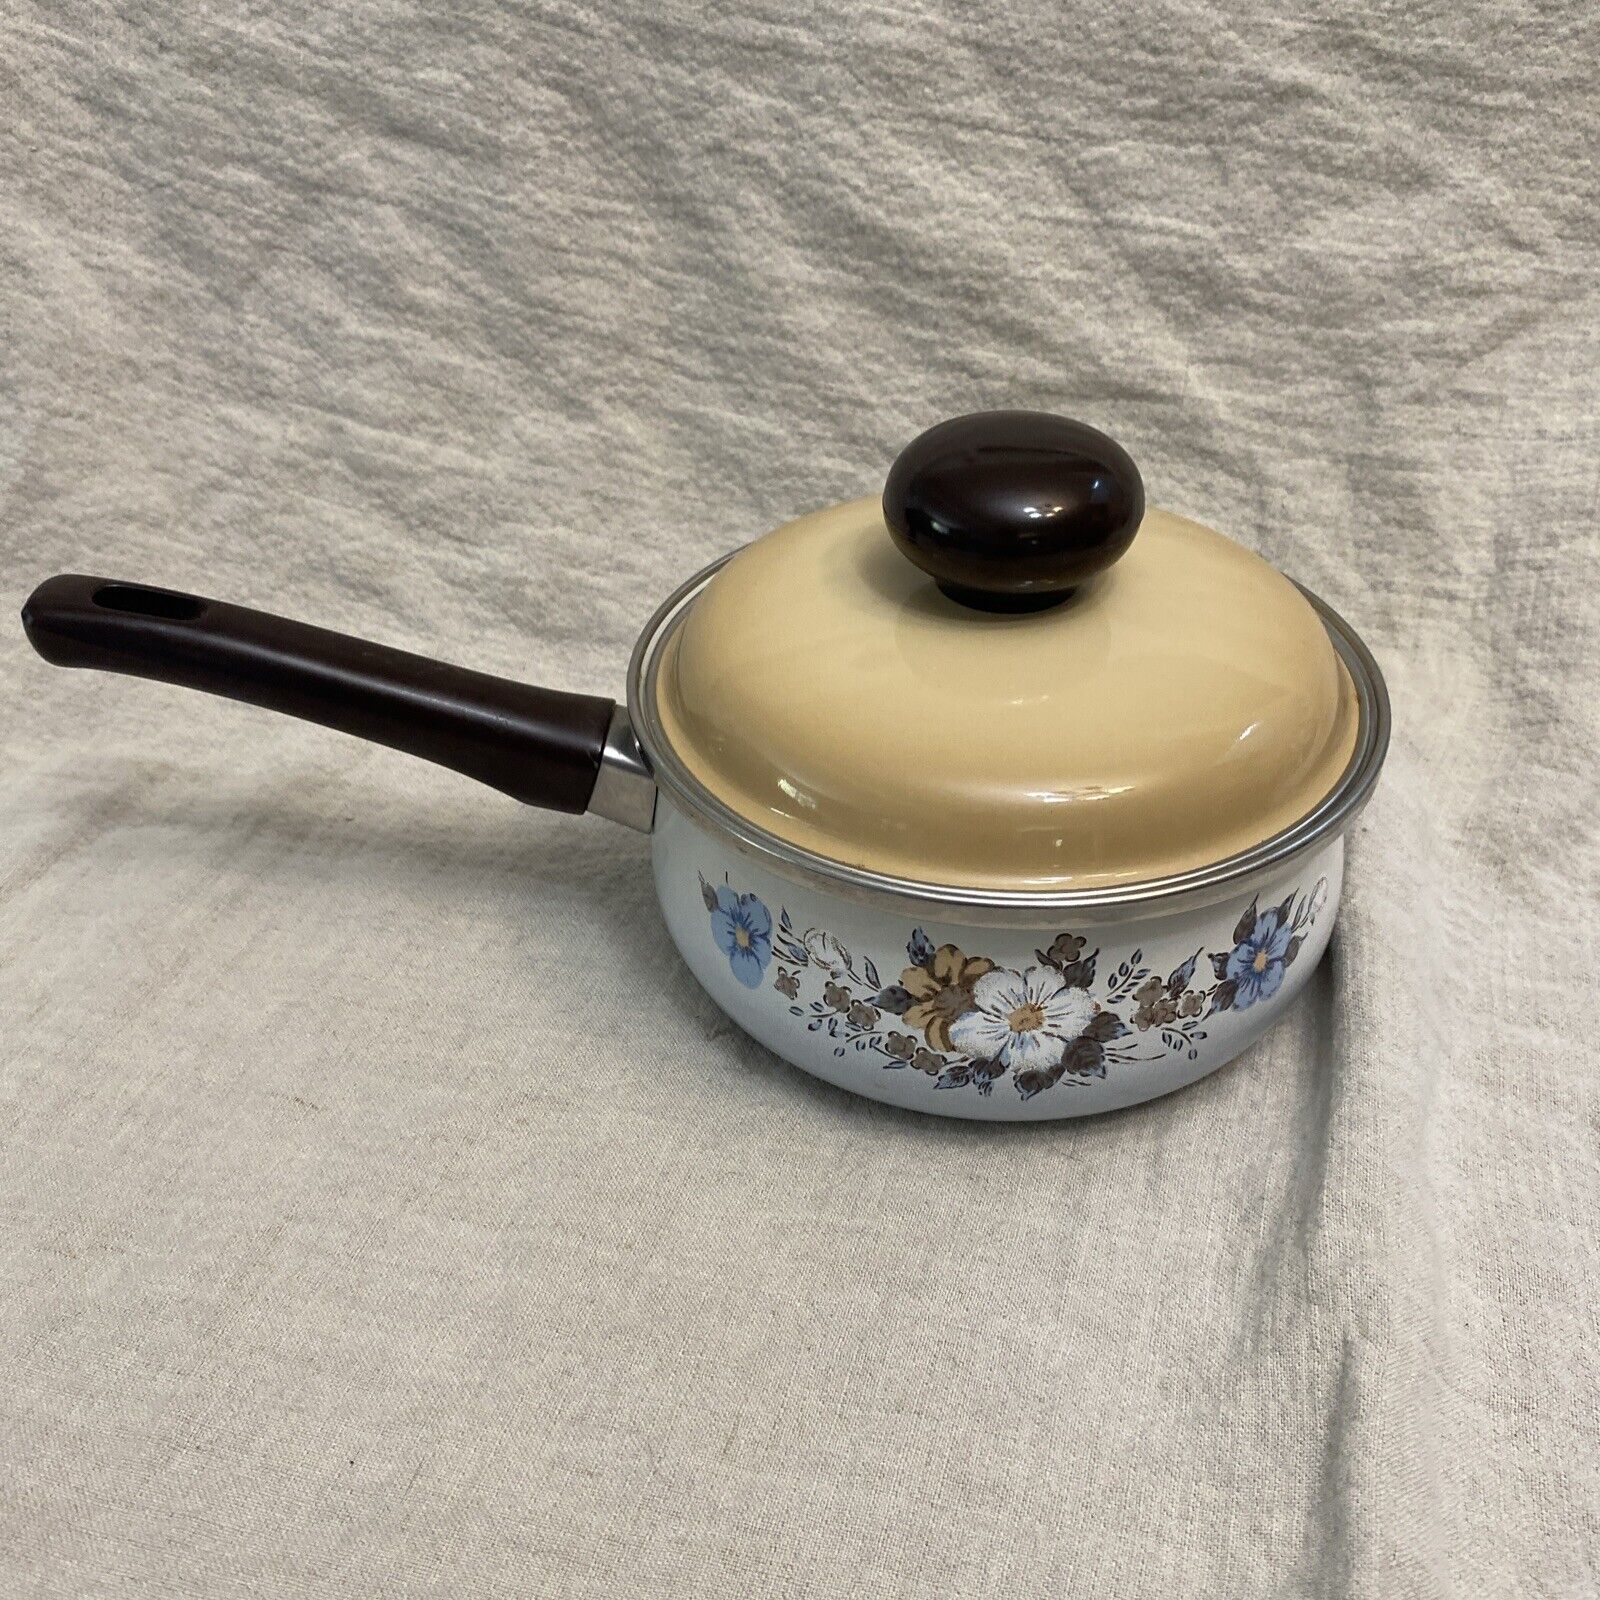 Vintage Floral Crowning 7” Pan With Lid Cookware Enamel Retro 1.5 Qt.